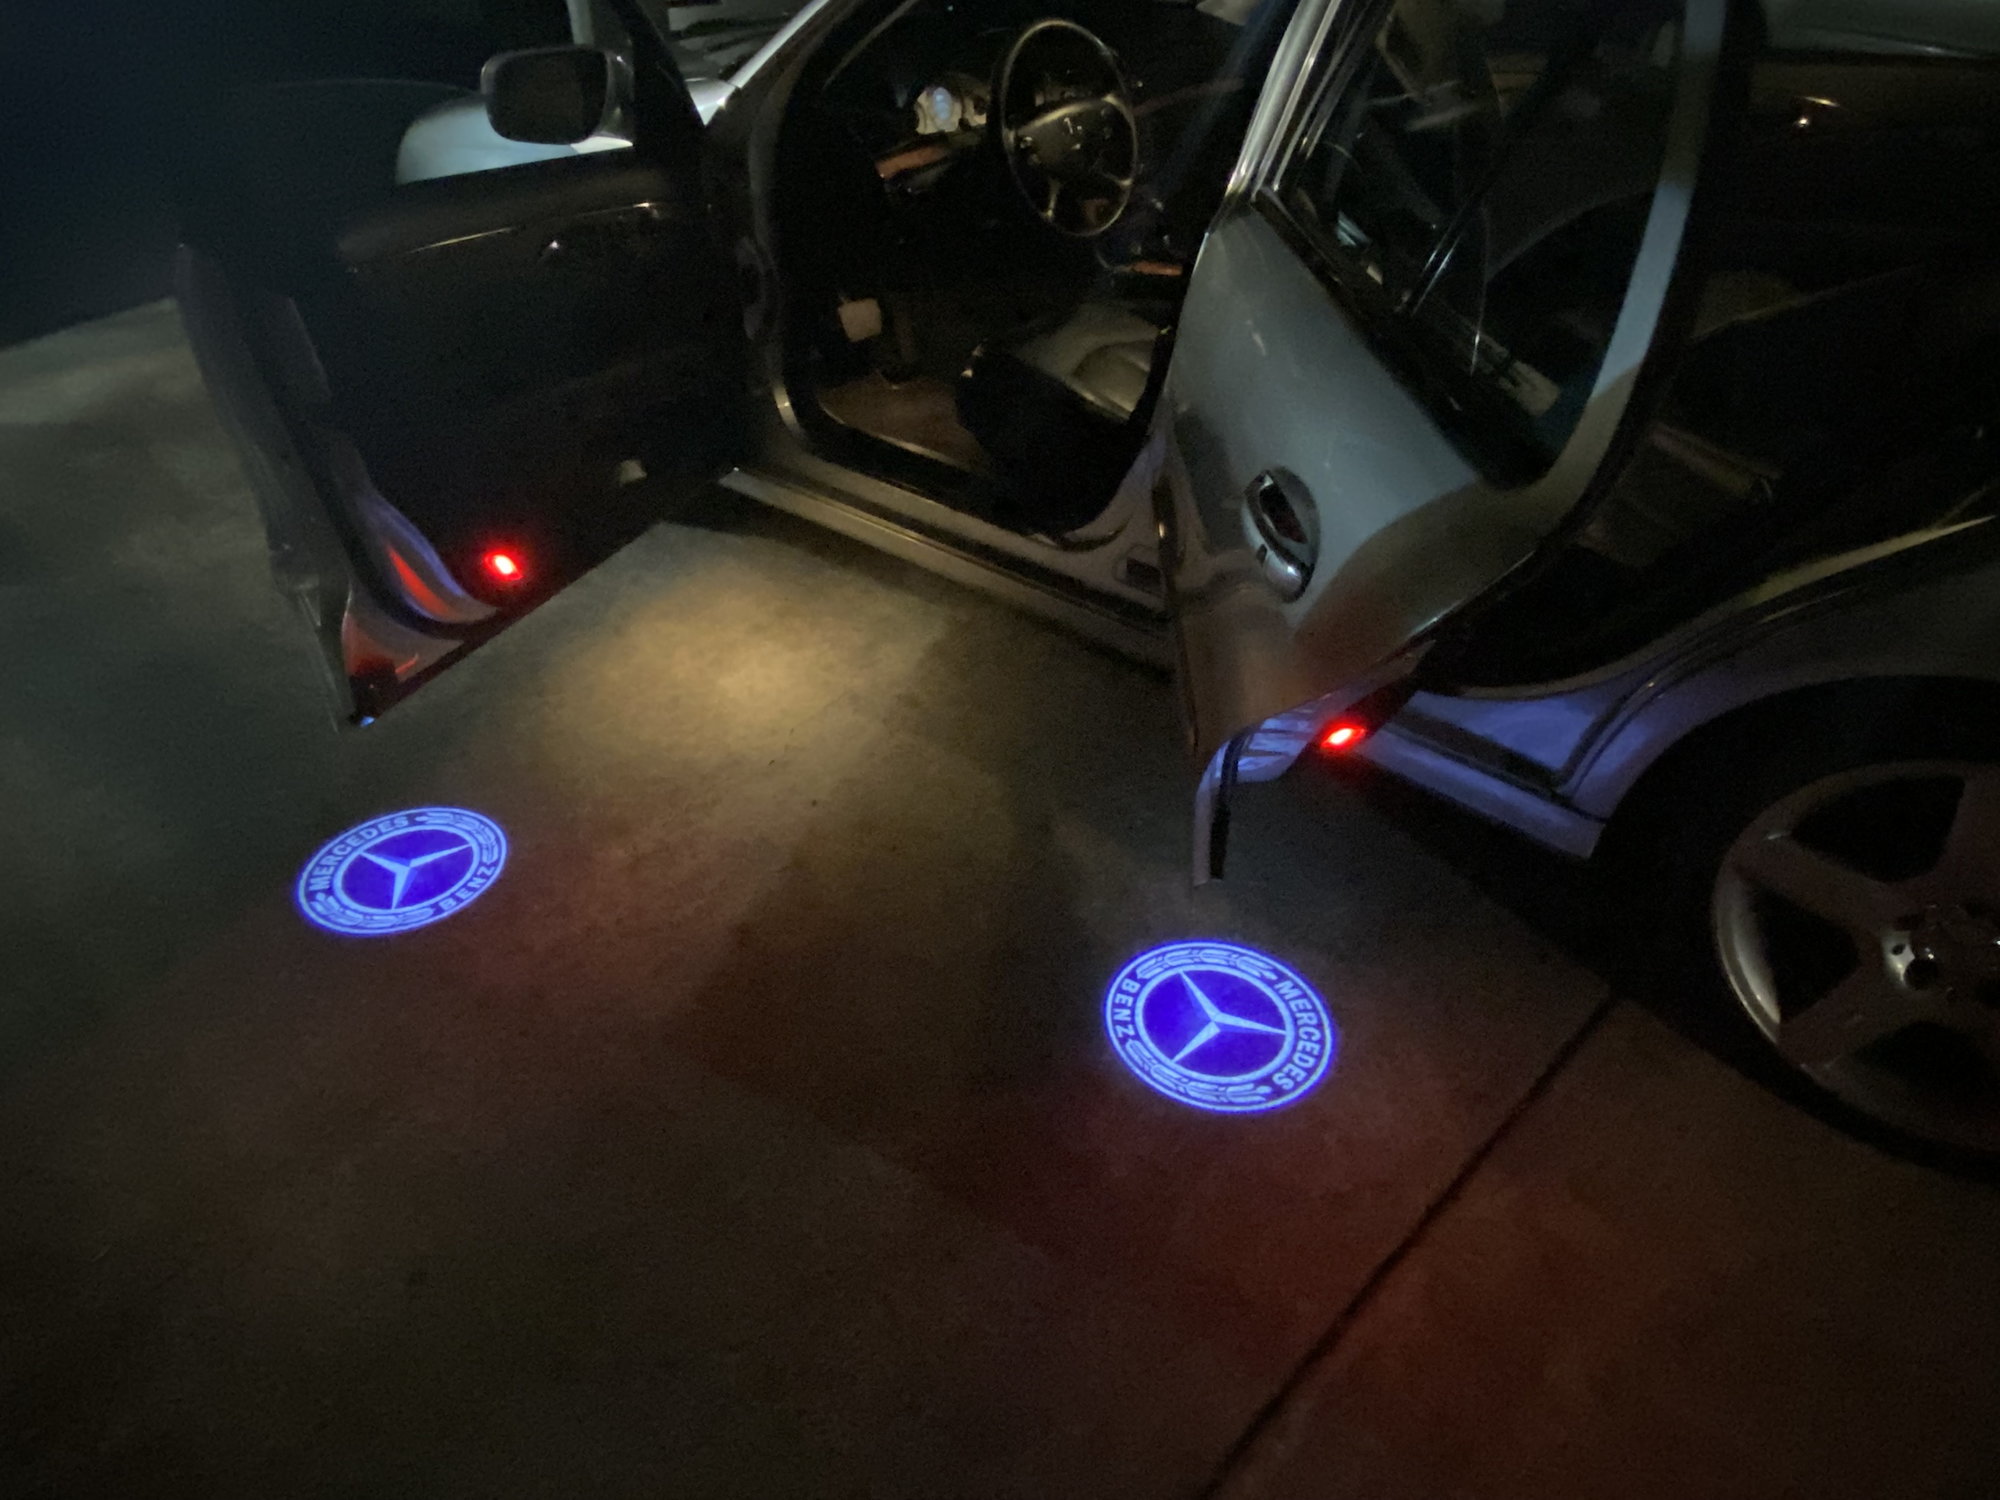 Finally. Phantom/Puddle/Ghost lights for my W211 E350 - MBWorld